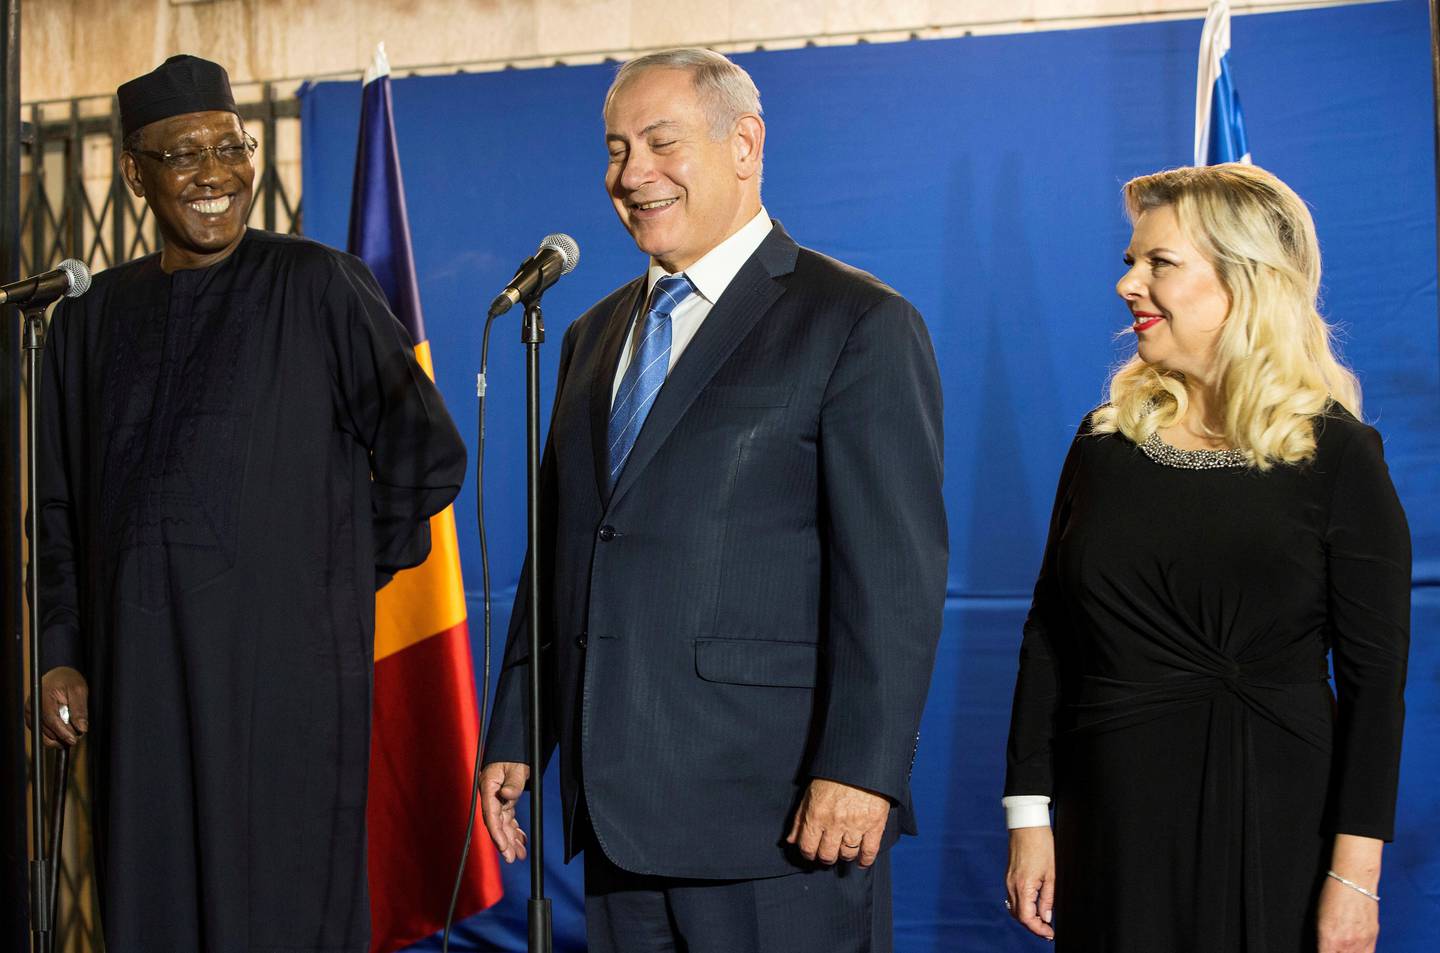 The Republic of Chad President Idriss Deby with Israeli Prime Minister Benjamin Netanyahu and his wife Sarah, before their dinner at the Prime Minister's residence in Jerusalem on Sunday Nov. 25, 2018. This is the first visit by a Chadian president since Israel was founded in 1948. (Heidi levine/Pool via AP)